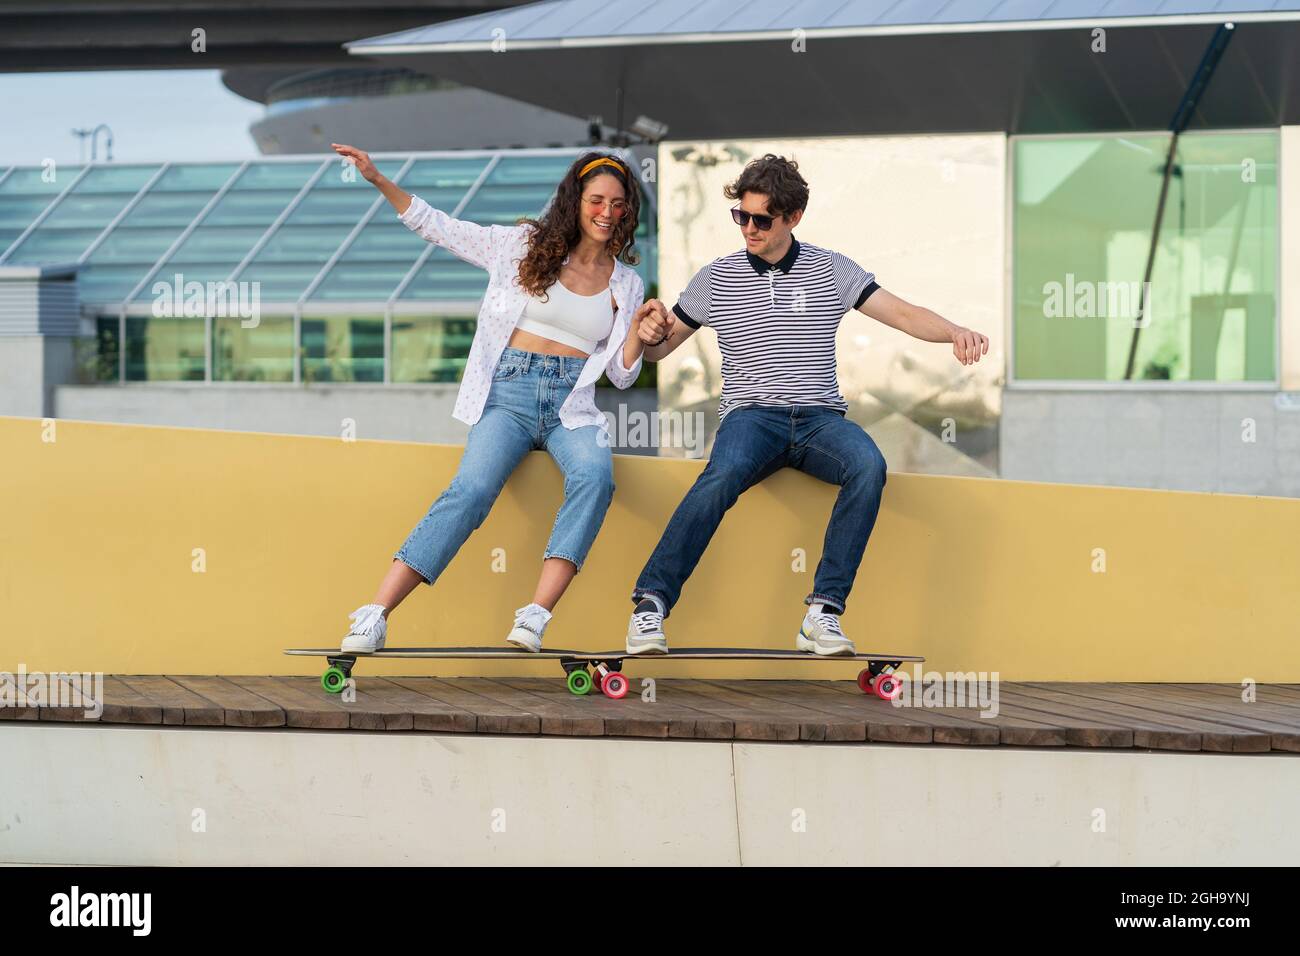 Carefree hipster man and woman young couple having fun after skateboarding laugh enjoy time together Stock Photo